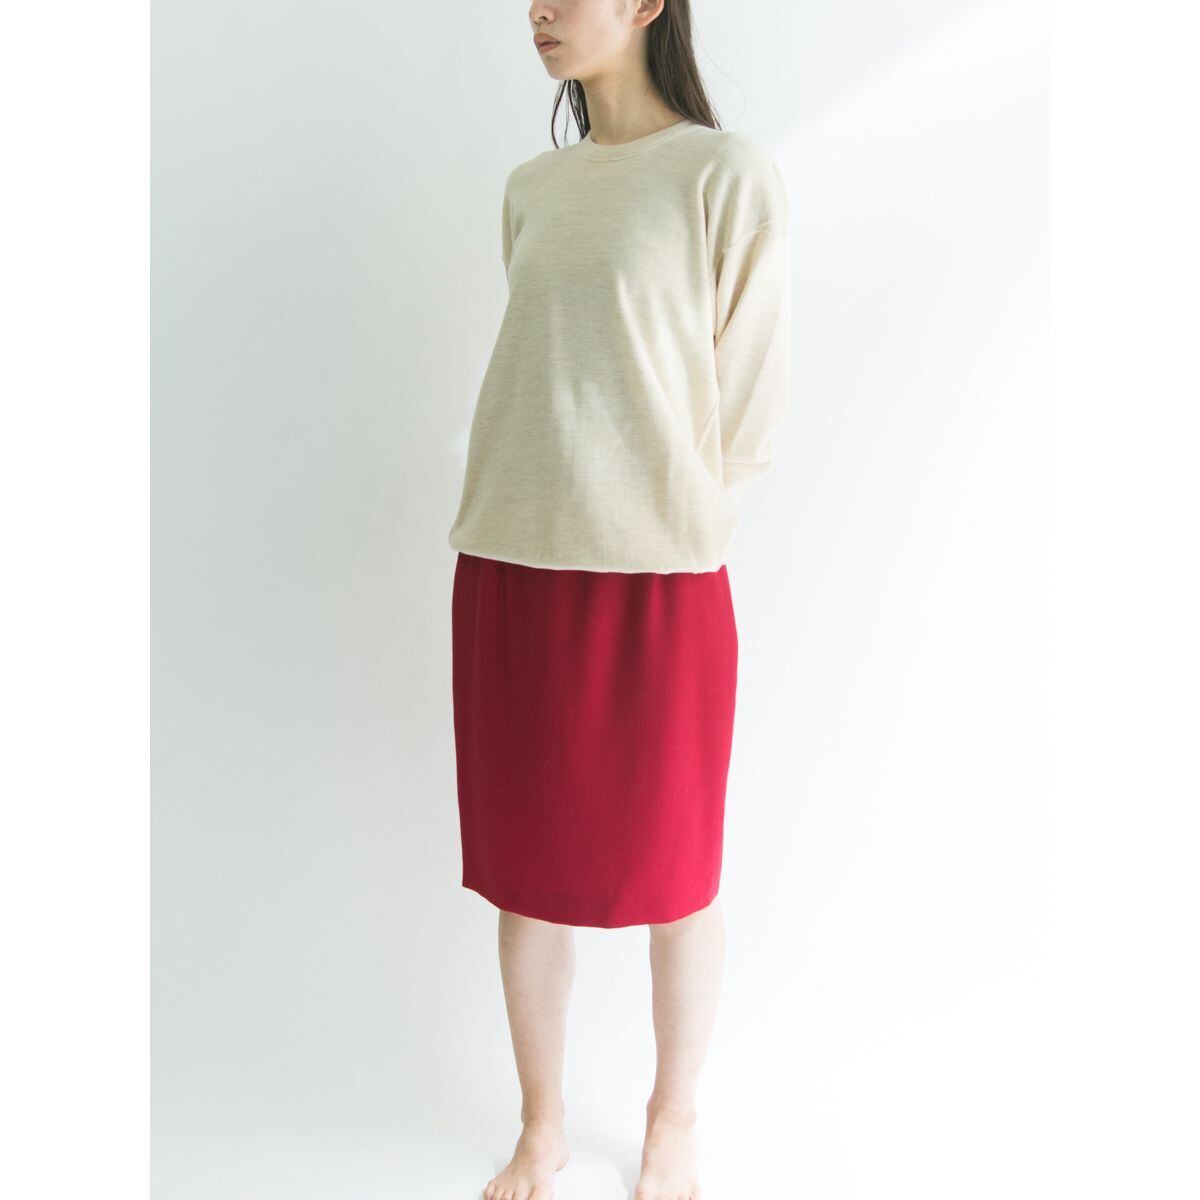 【STATE OF CLAUDE MONTANA】Made in ITALY wool middle skirt（ステート オブ クロード モンタナ  ウール ミドル丈 スカート）10a | MASCOT/E powered by BASE